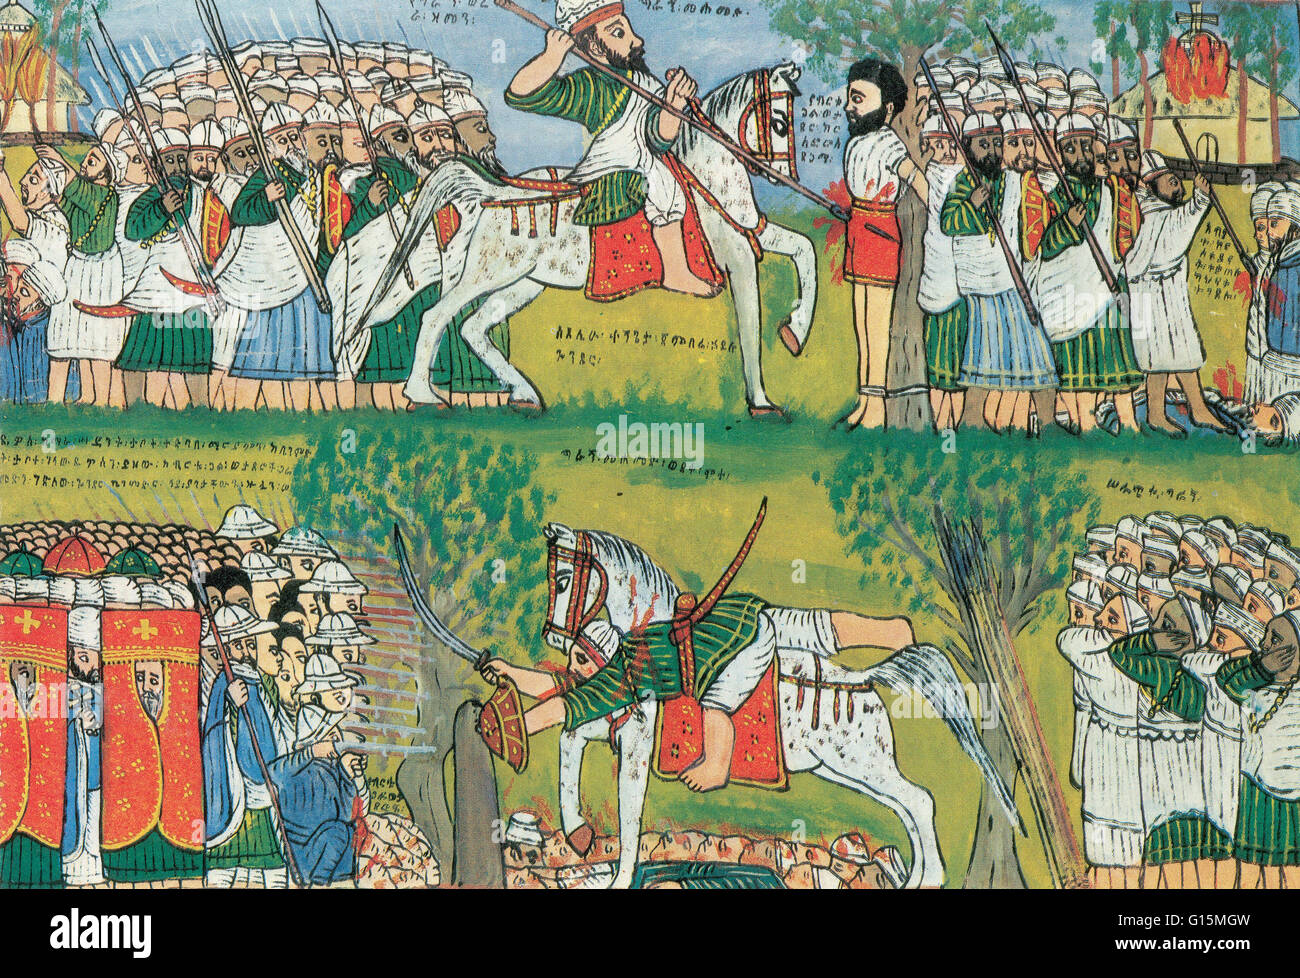 'Burning of Chuches by Muslims and the Death of Cristobal de Gama and the Fall and Death of Ahmed Ibrihim al-Ghazi (1506-43) Shot by a Portuguese Musketeer.' Wooden panel painted by Kegneketa Jemlieri Hailu of Gondar, circa 1900. Christopher de Gama (1515 Stock Photo